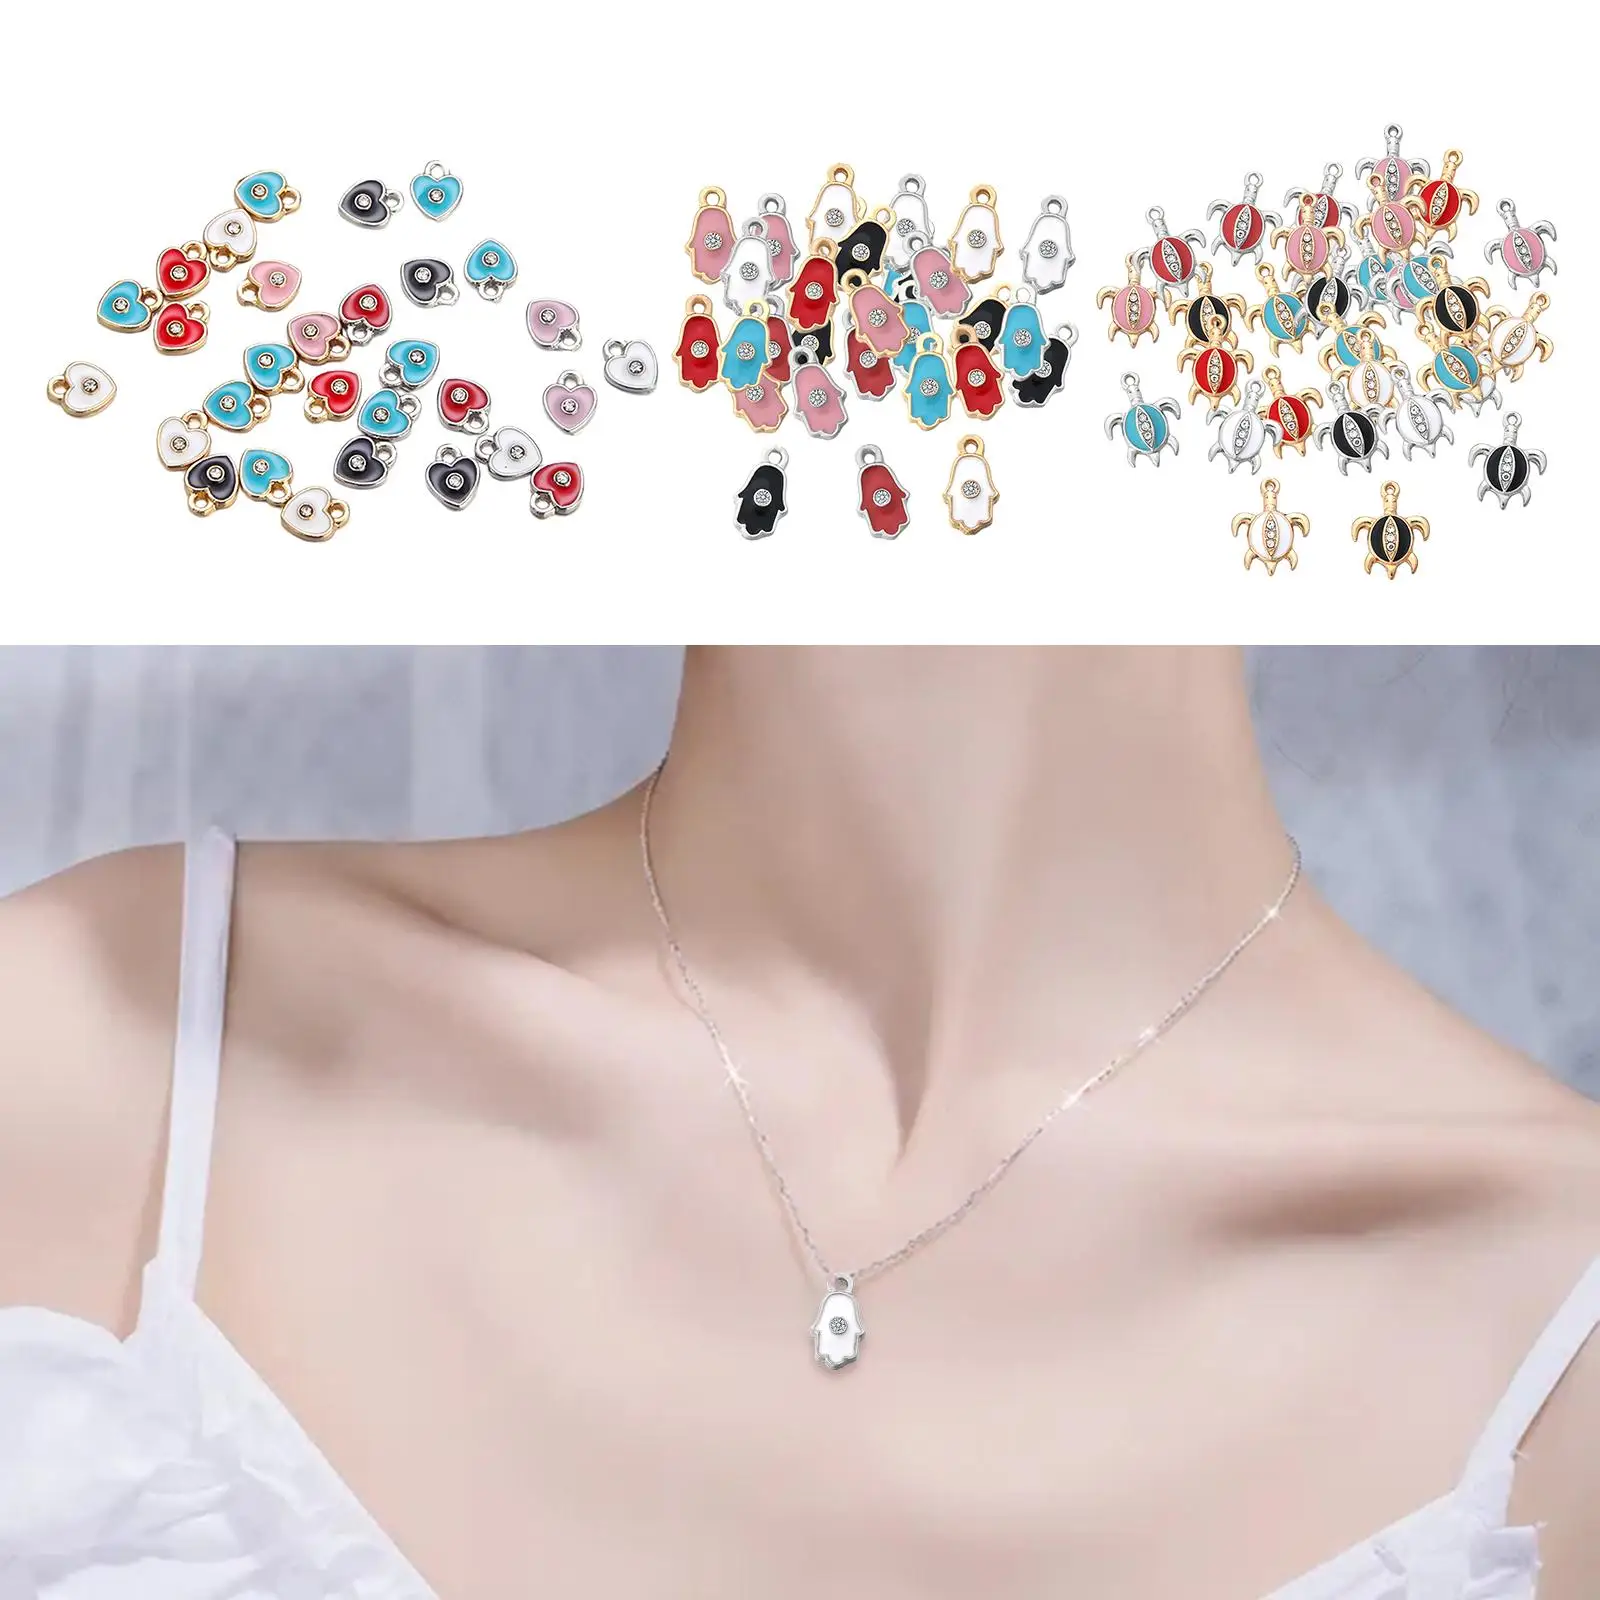 30 Pcs Charm Pendant DIY for Earrings Necklace Bracelet Jewelry Making and Crafting